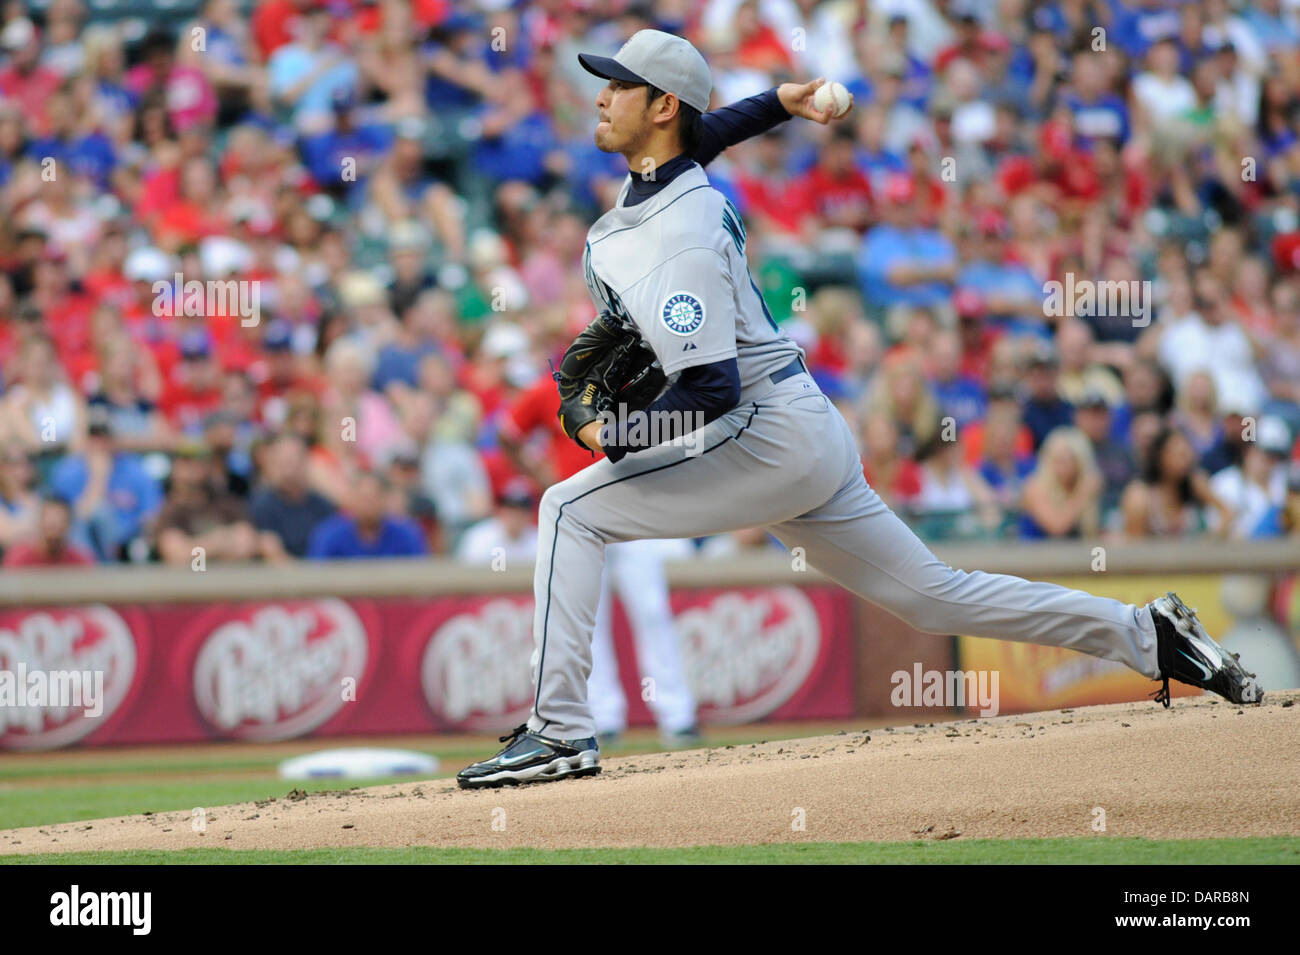 July 4, 2013 - Arlington, TX, USA - Seattle Mariners starting pitcher Hisashi Iwakuma (18) delivers a pitch during the first inning of an MLB baseball game between the Seattle Mariners and the Texas Rangers at Rangers Ballpark in Arlington in Arlington, TX, Thursday, July 4, 2013. Stock Photo